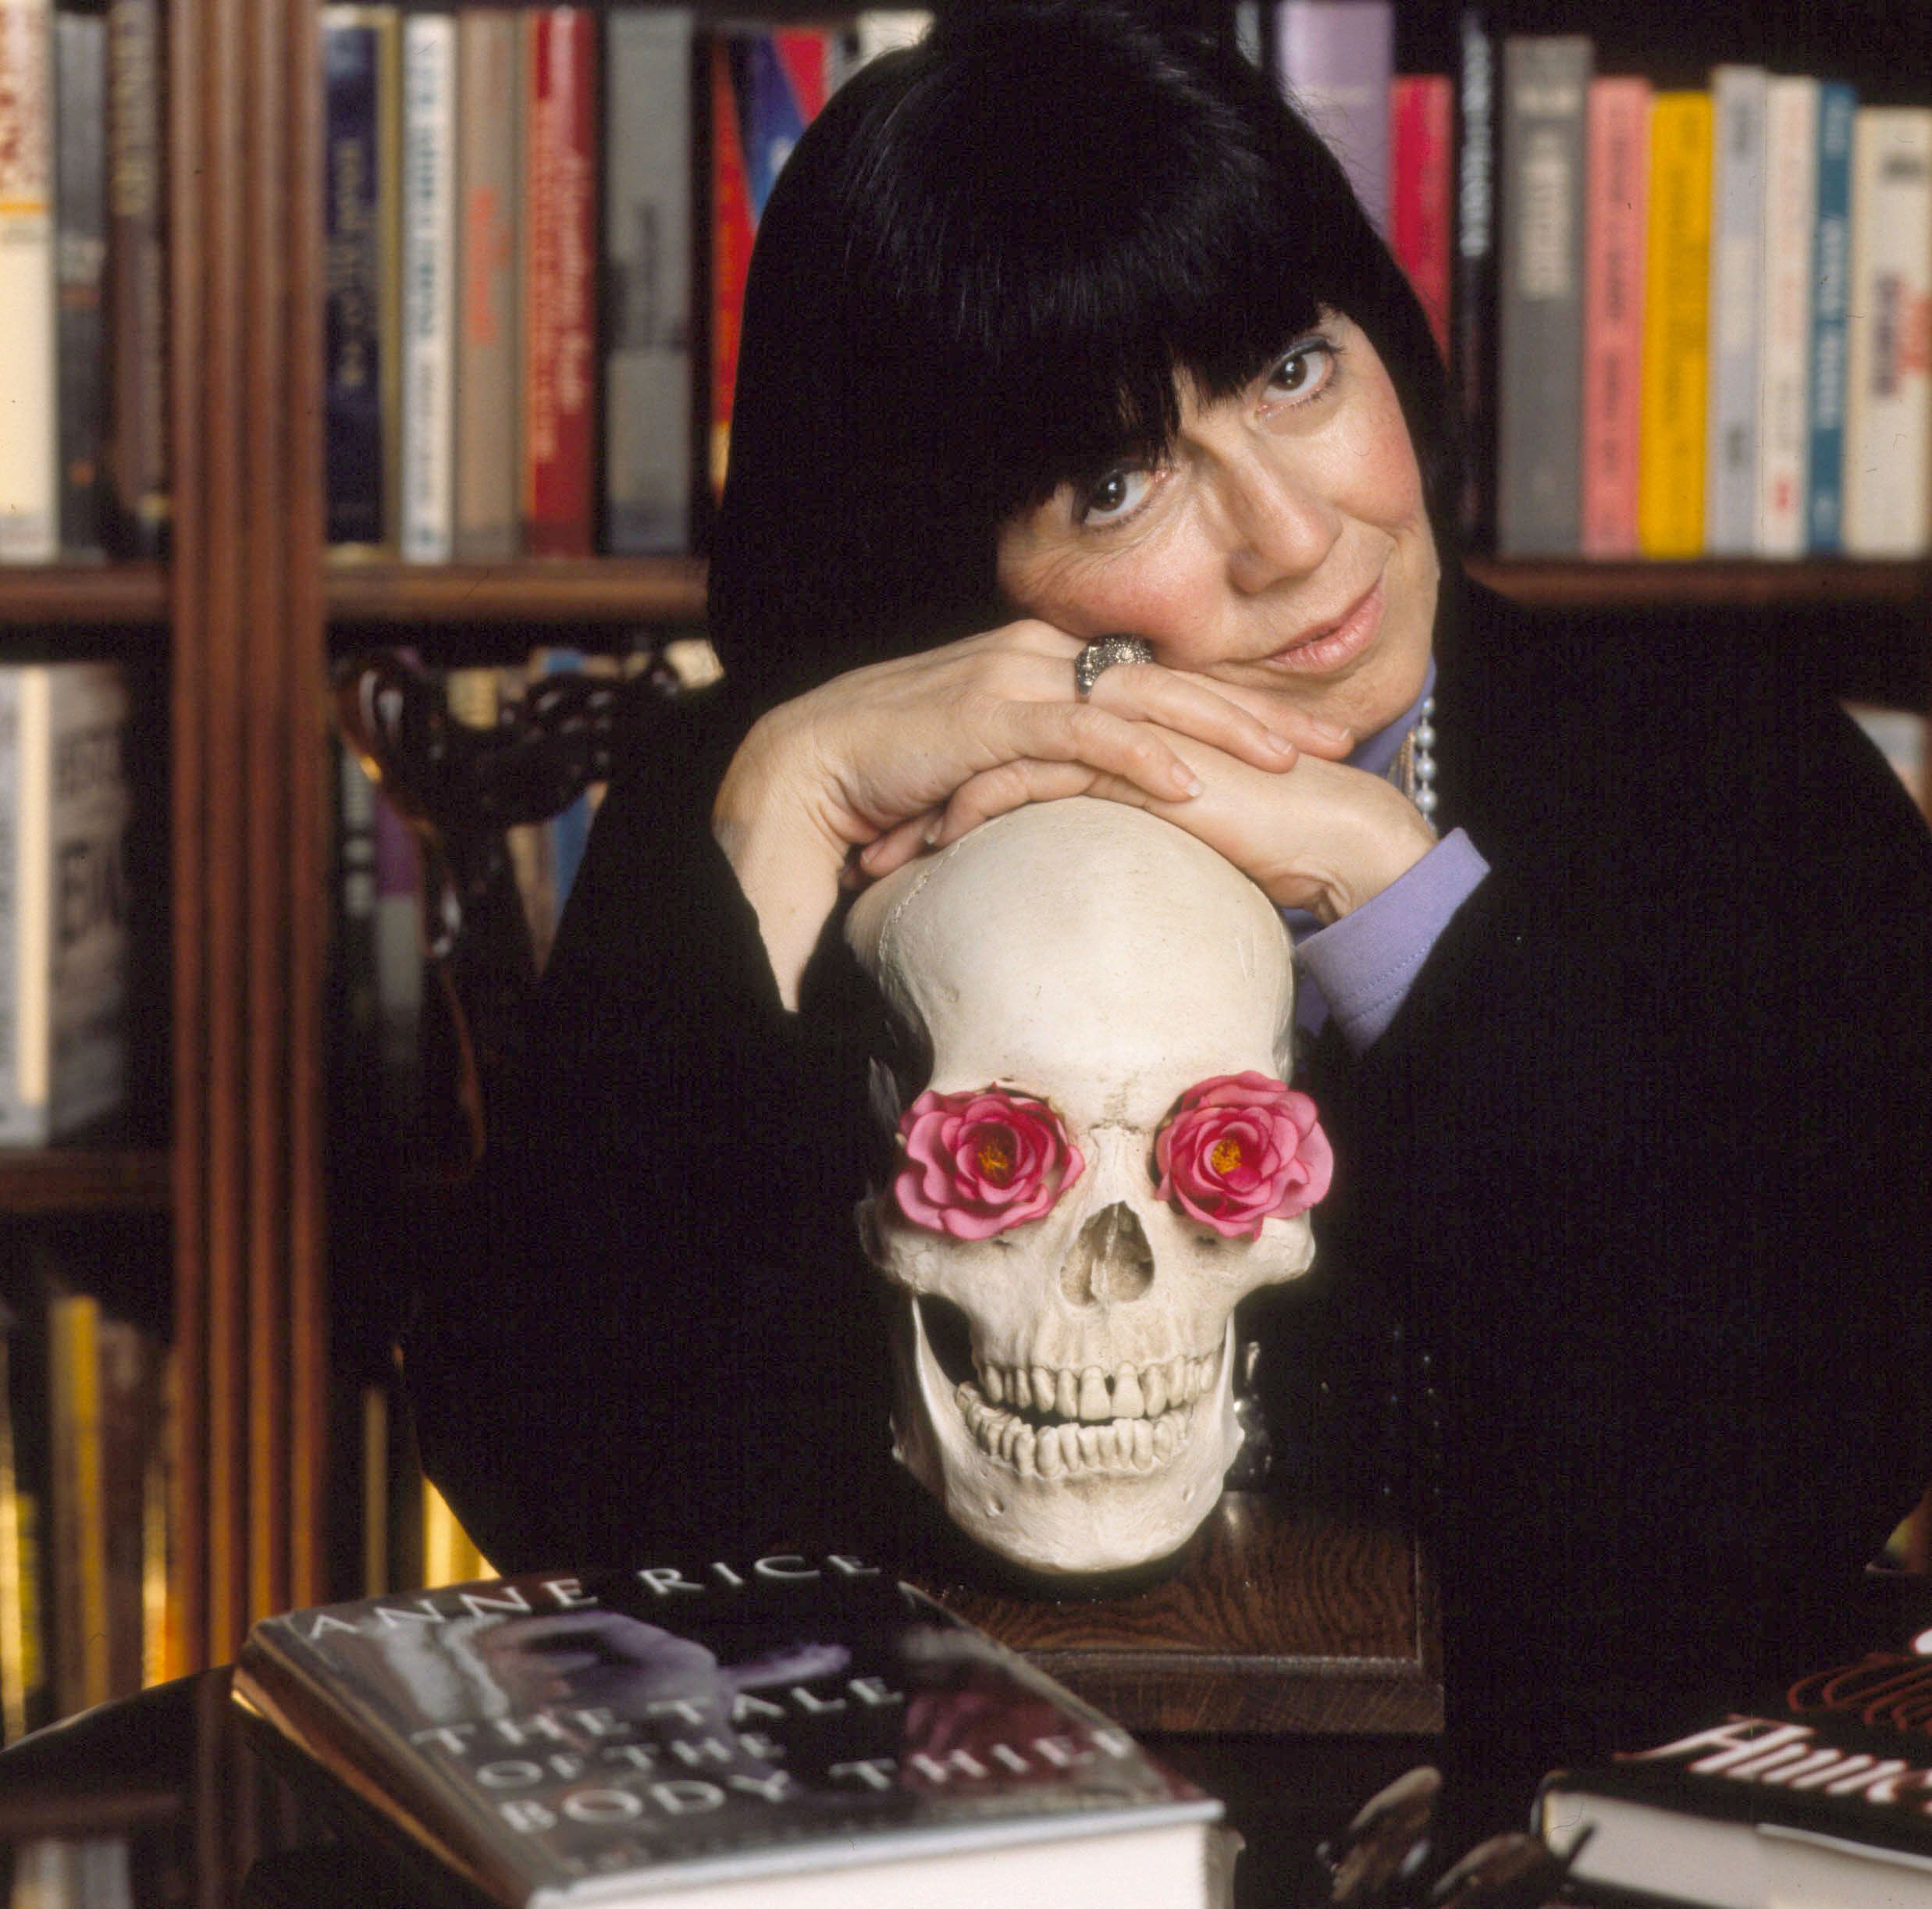 A Comprehensive Guide to Anne Rice, the Queen of Sexy Vampire Fiction